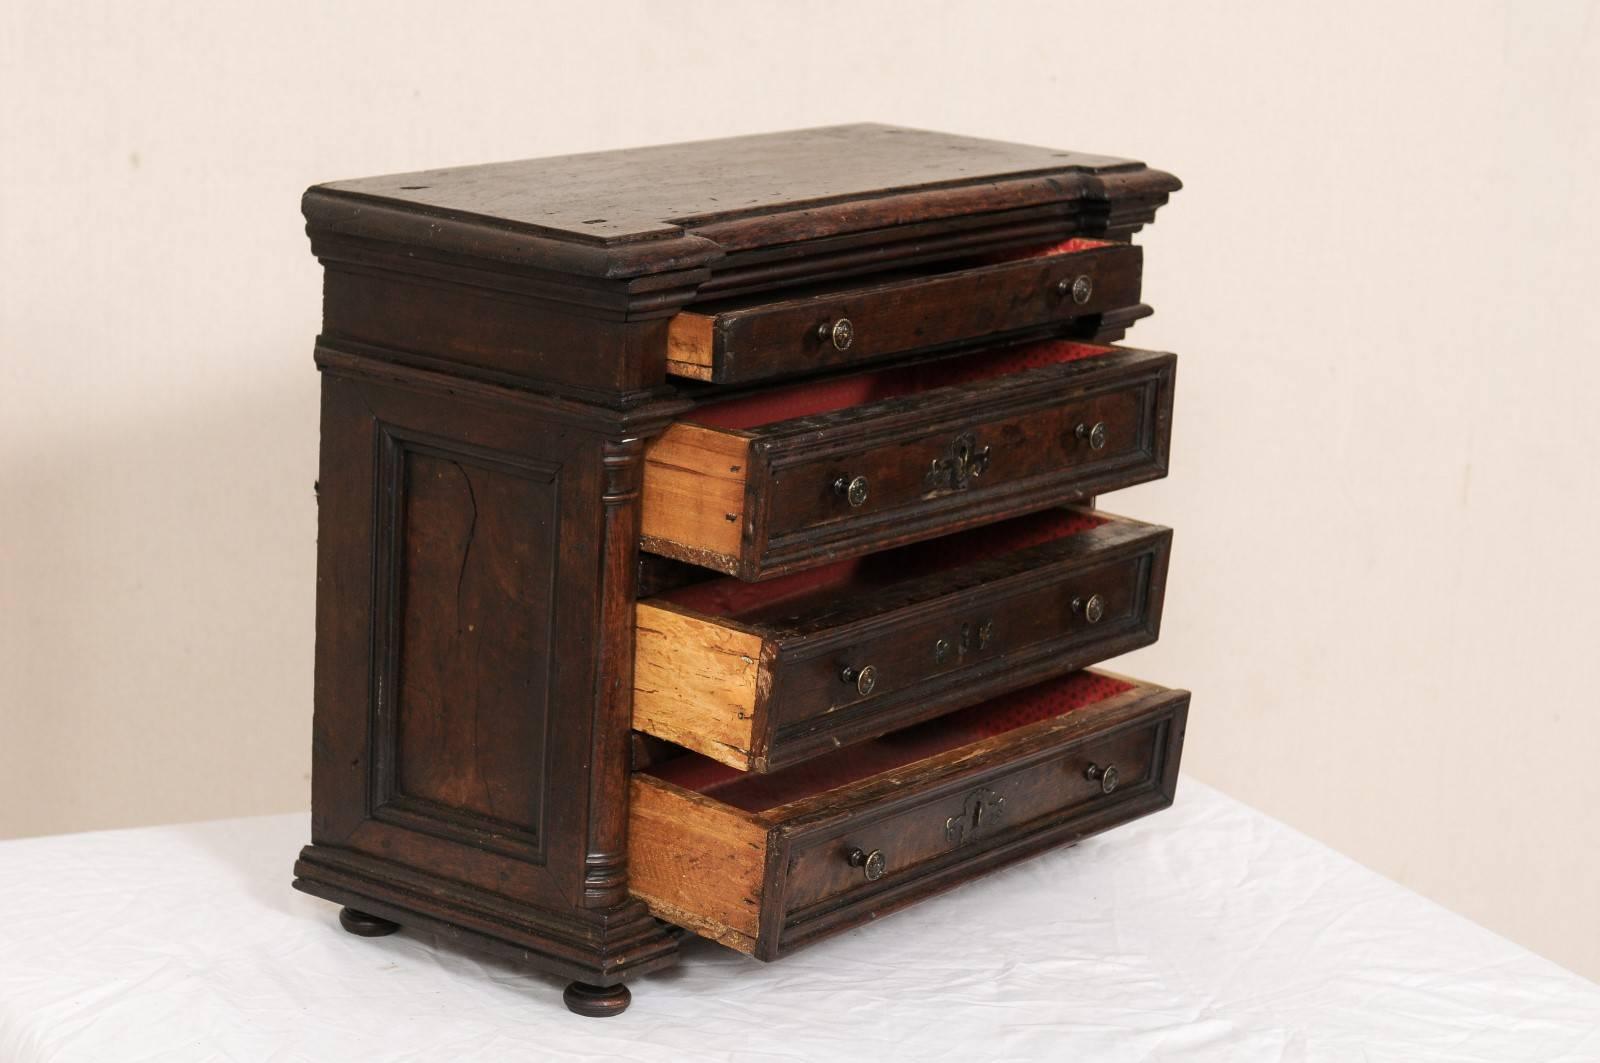 Italian Early 18th Century Petite-Sized Walnut Chest w/Drawers for Table-Top  For Sale 1